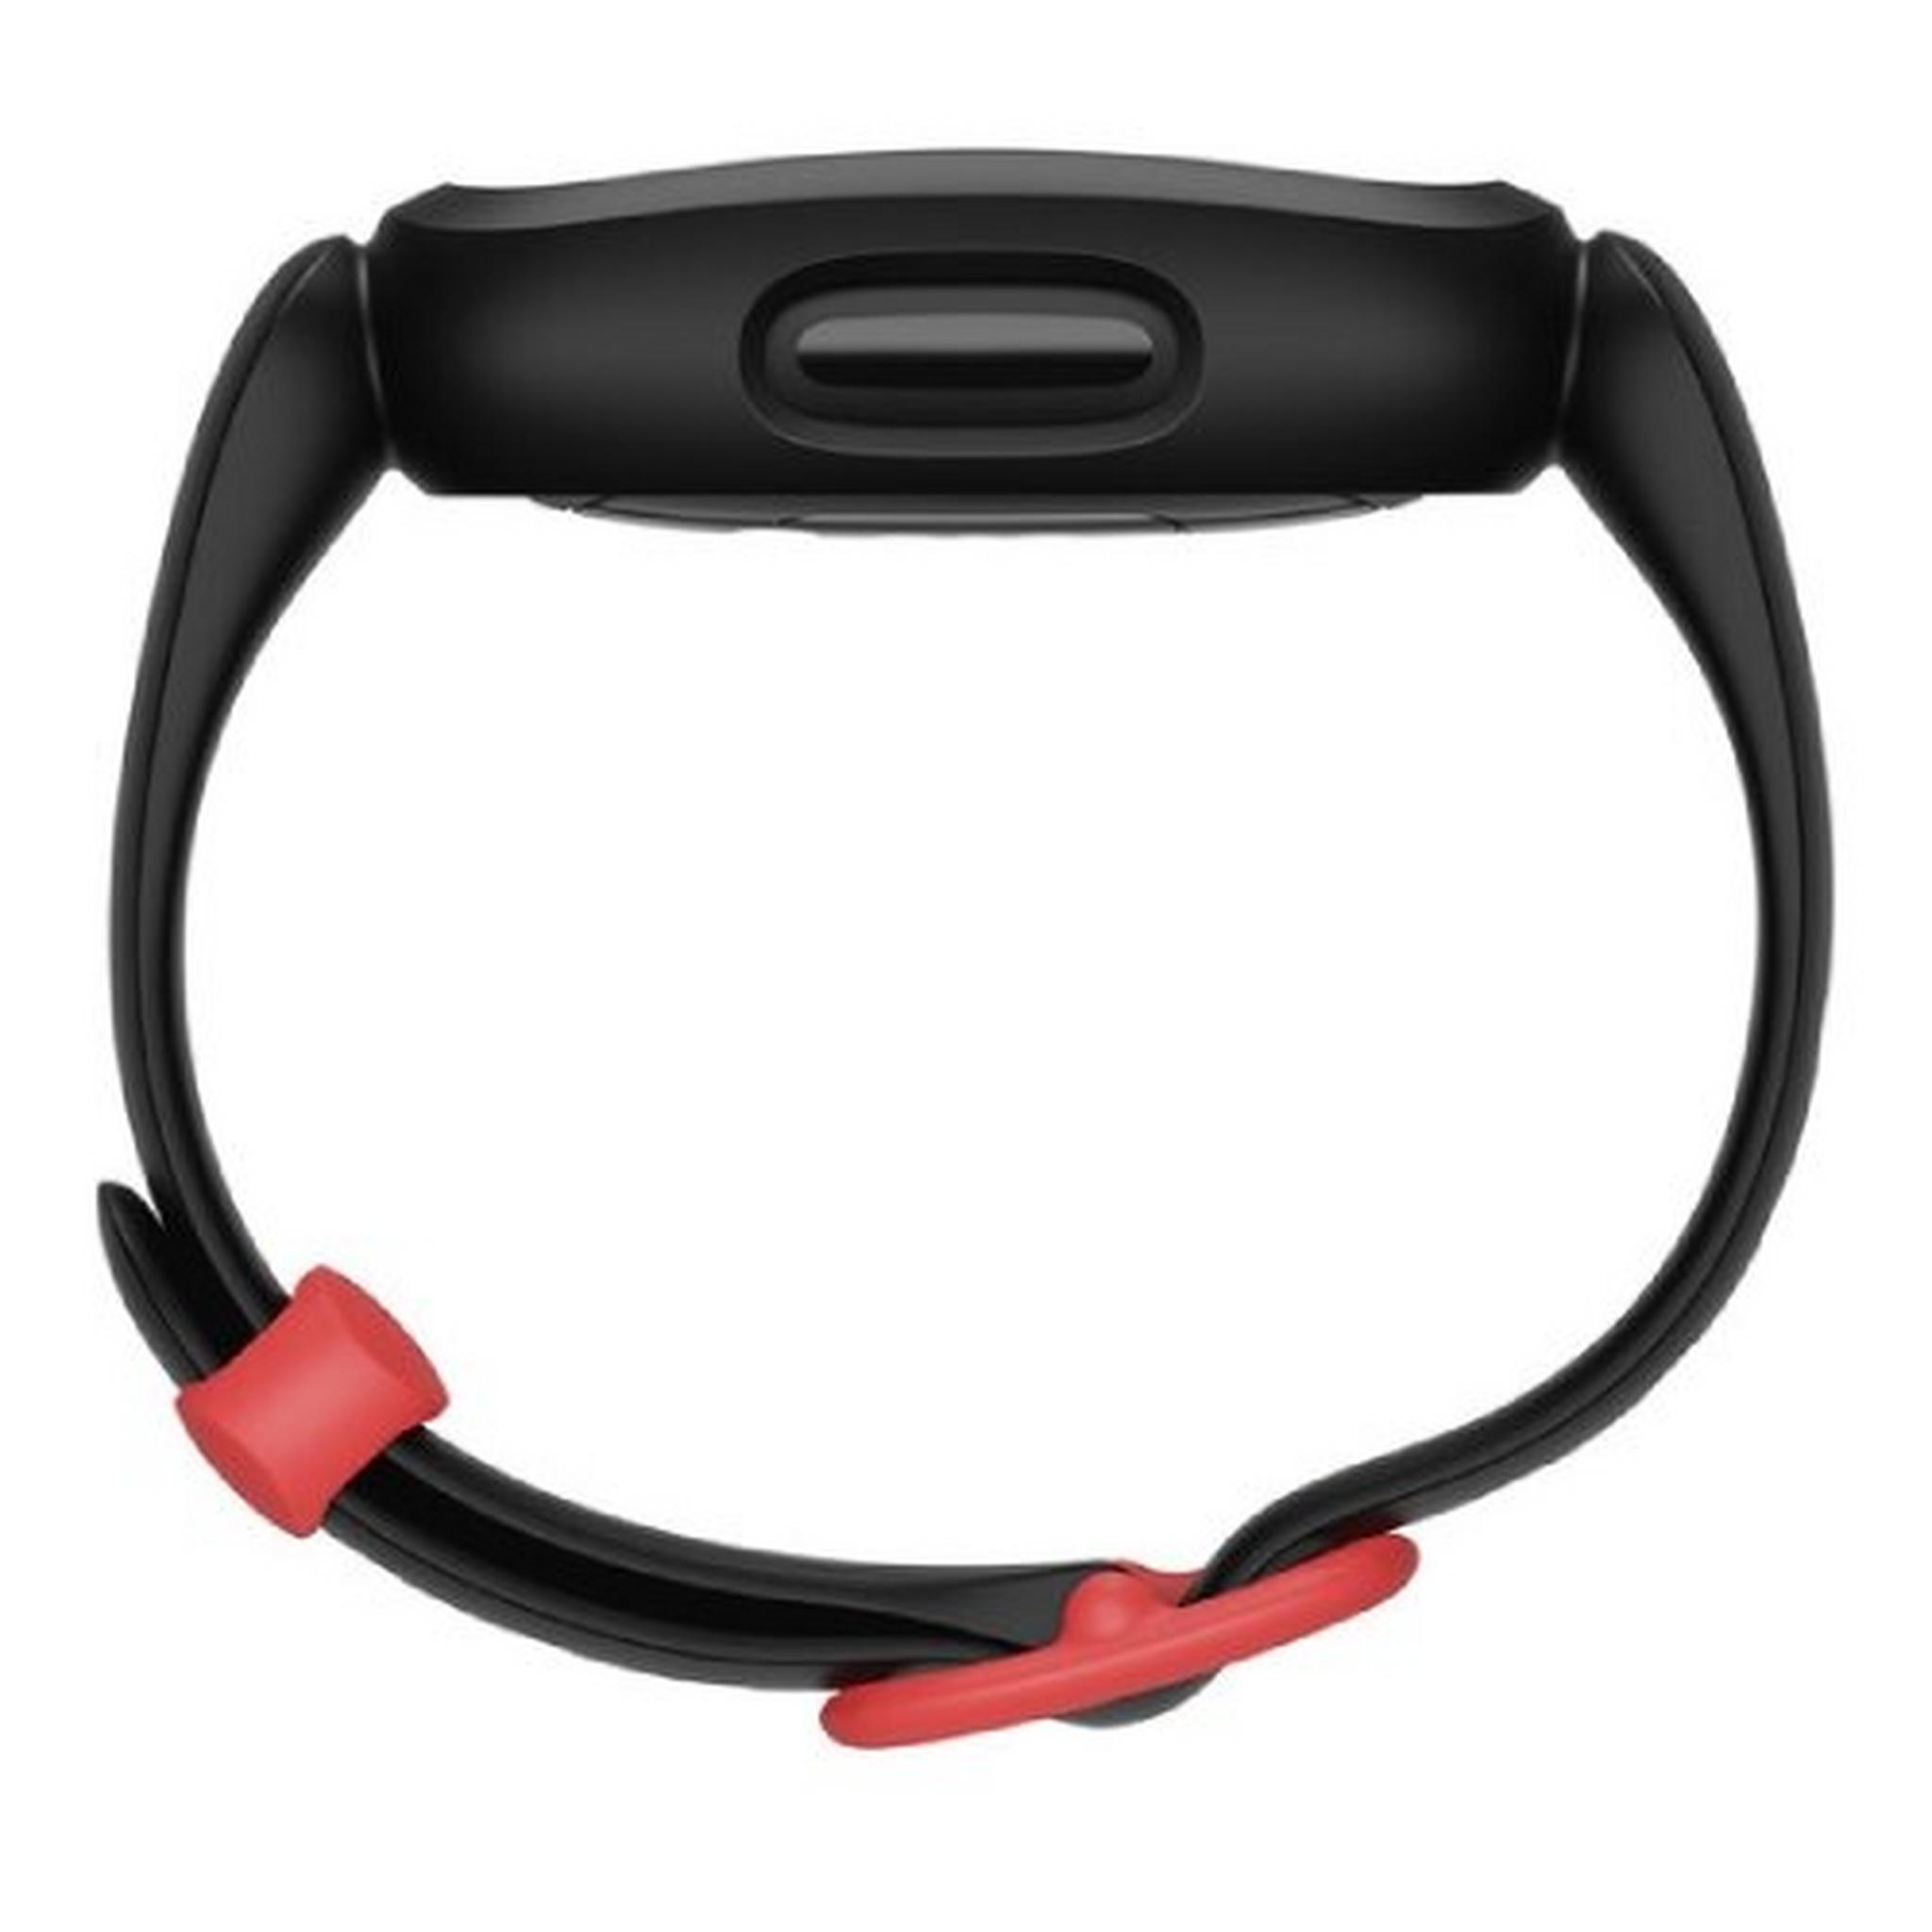 FitBit Ace 3 Activity Tracker - Black/Red